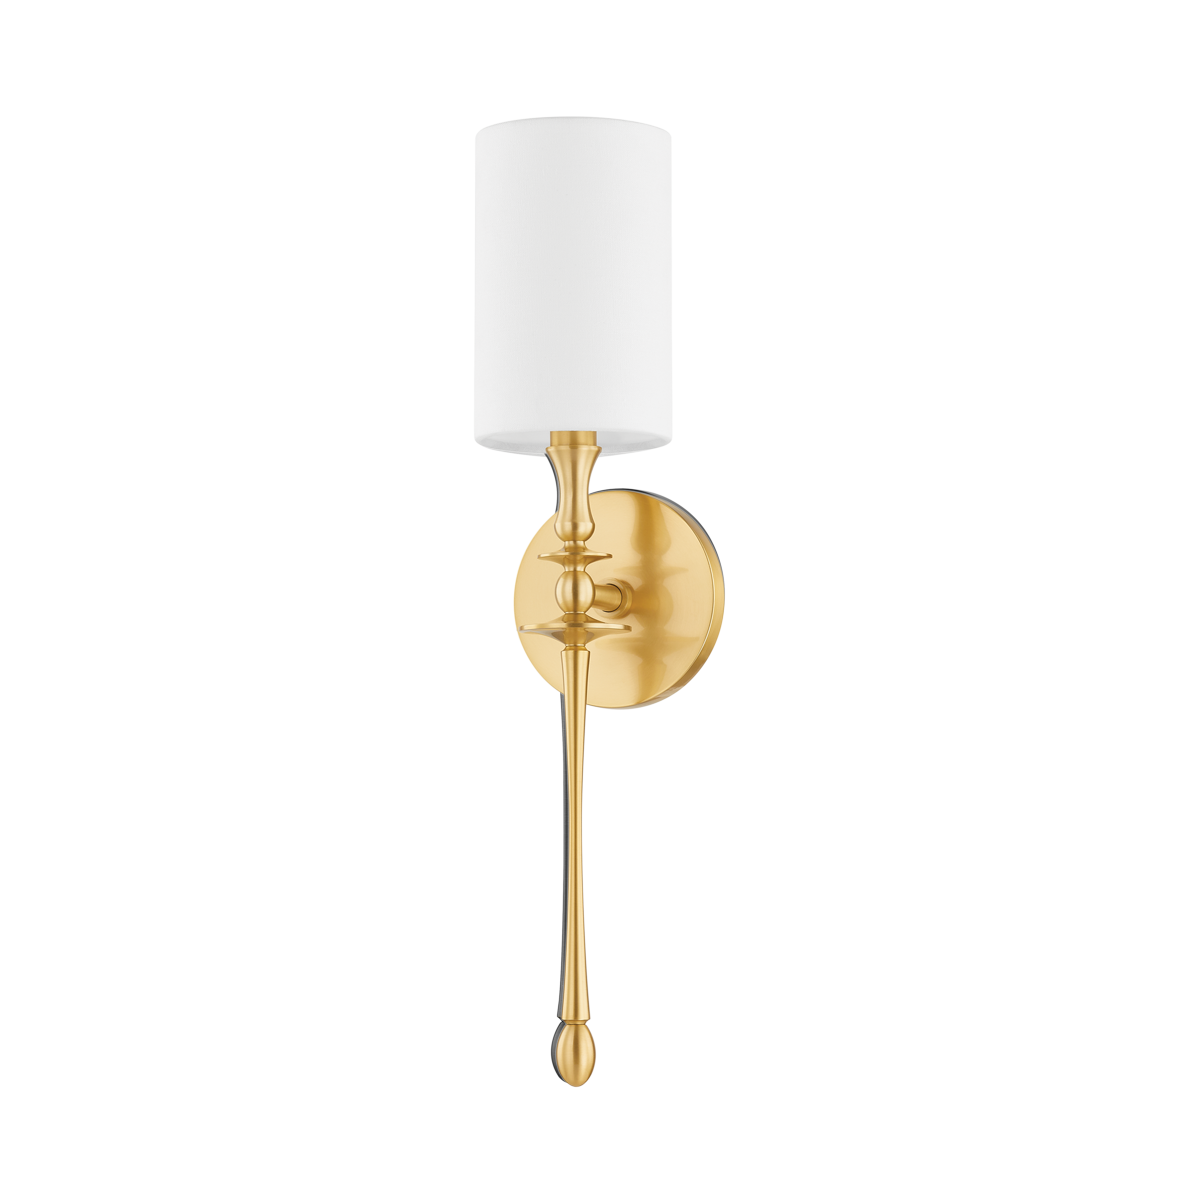 Hudson Valley Lighting GUILFORD Wall Sconce Sconce Hudson Valley Lighting Aged Brass  